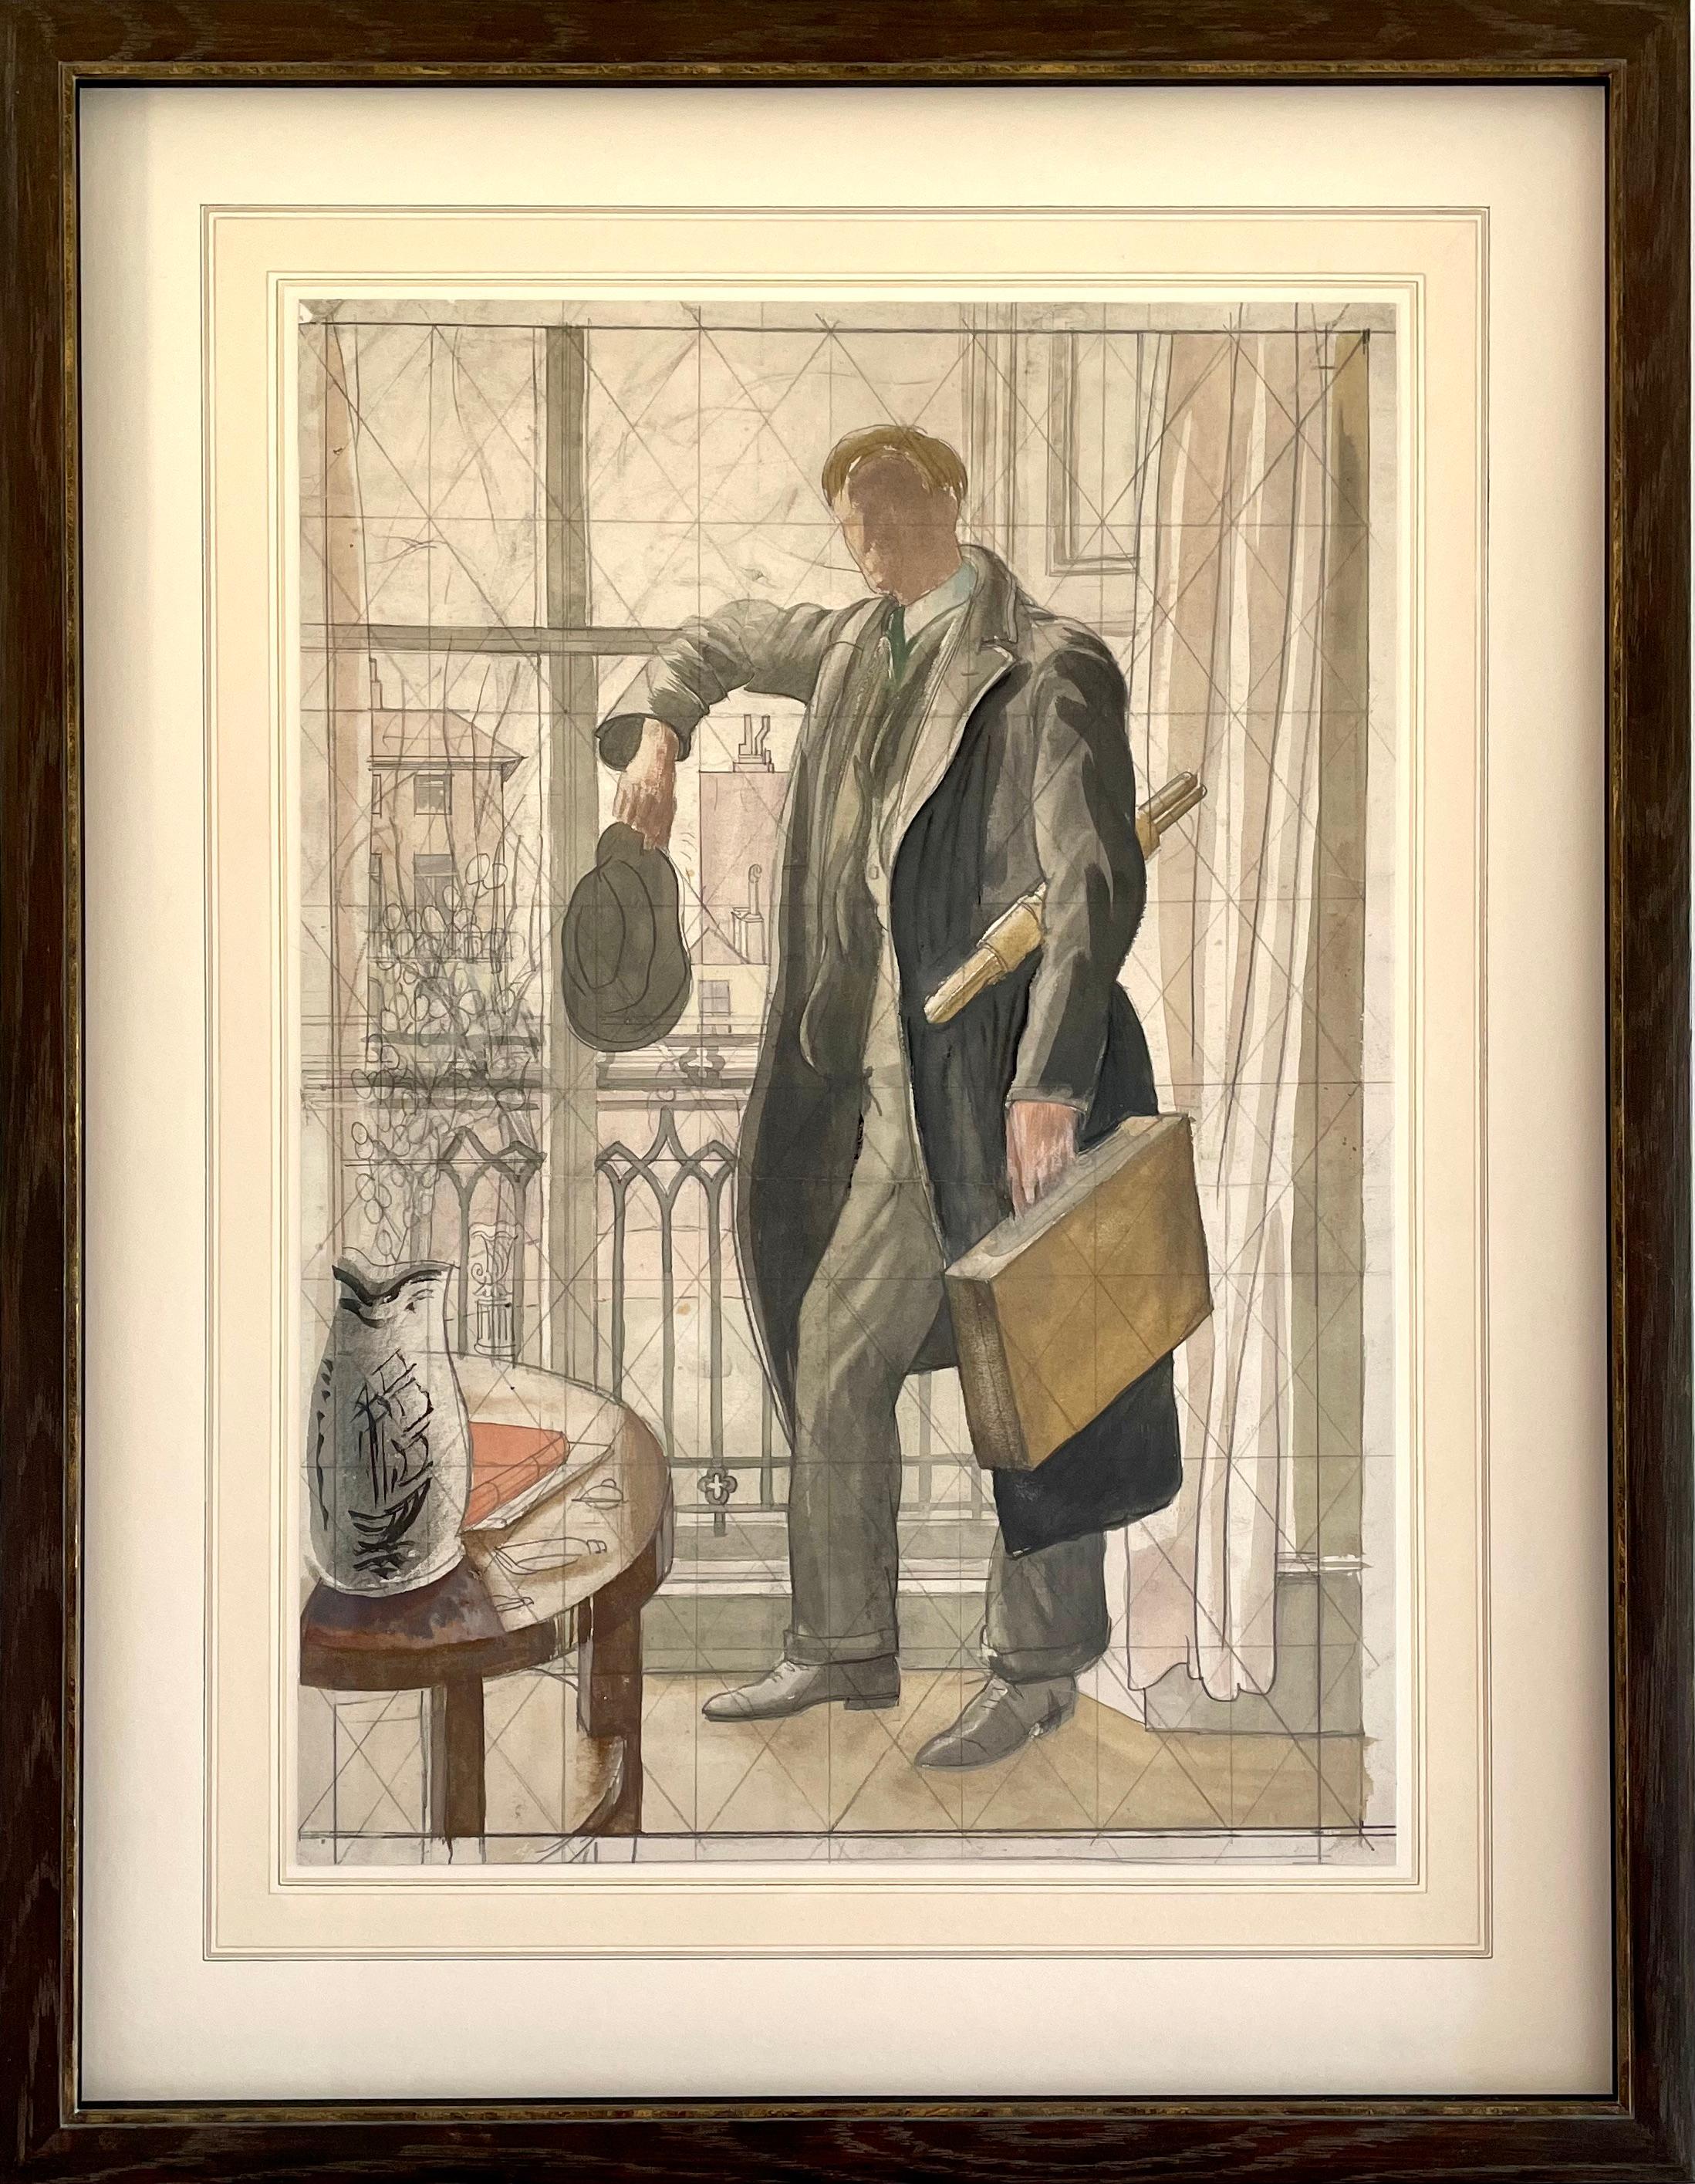 MARY ADSHEAD
(1904-1995)

Portrait of Stephen Bone, the artist’s husband

Pencil and watercolour, squared for transfer
Framed

45 by 32 cm., 17 ¾ by 12 ½ in.
(frame size 62.5 by 48.5 cm., 24 ¾ by 19 in.)

Mary Adshead enrolled at the Slade School of